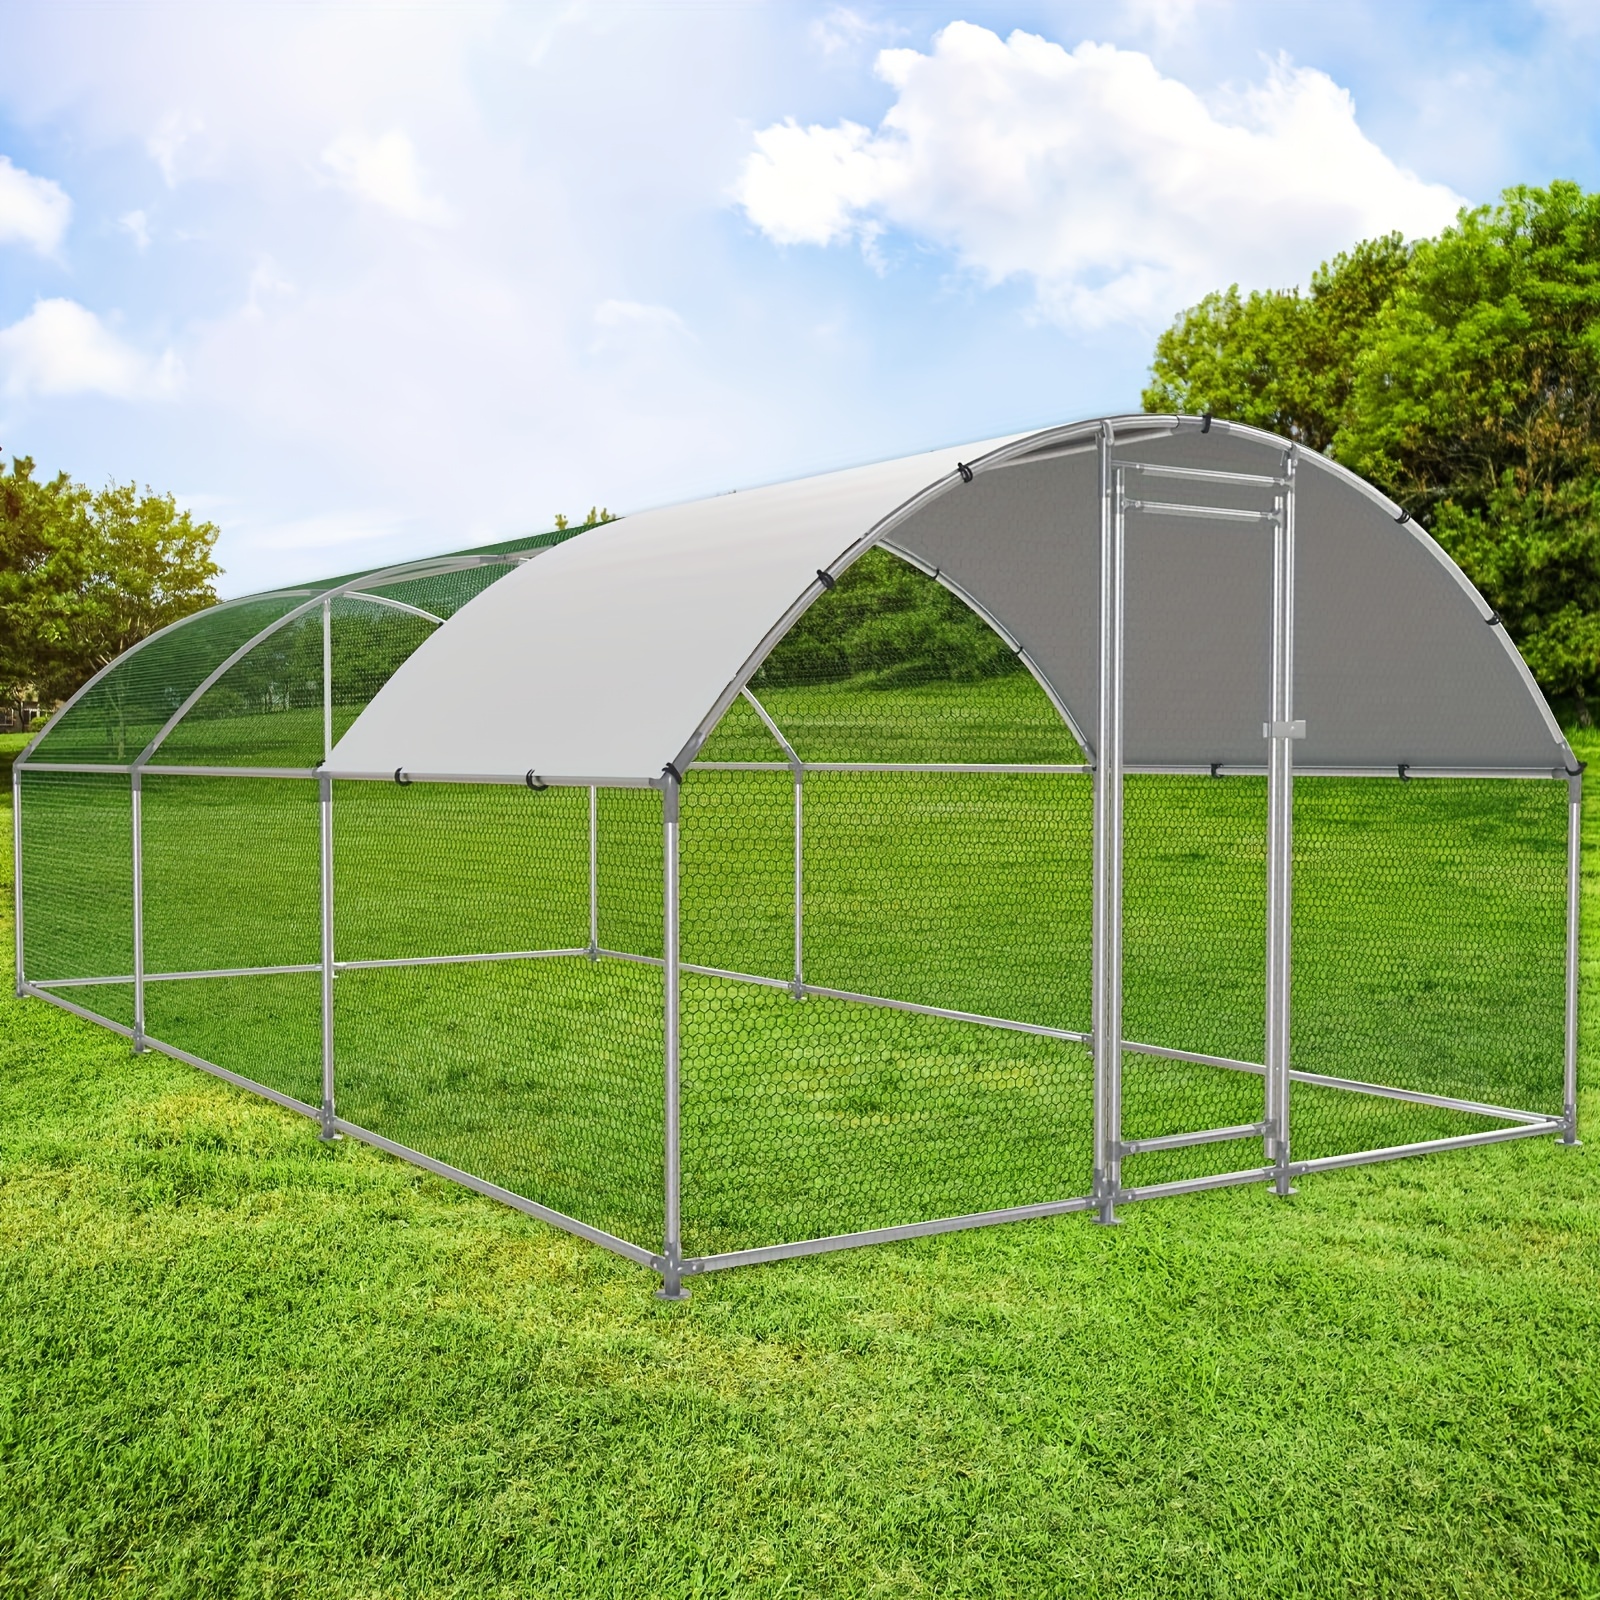 

Large Metal Chicken Coop Walk-in Poultry Cage Pen Dog Kennel With Waterproof And Anti-ultraviolet Cover For Outdoor Farm Use